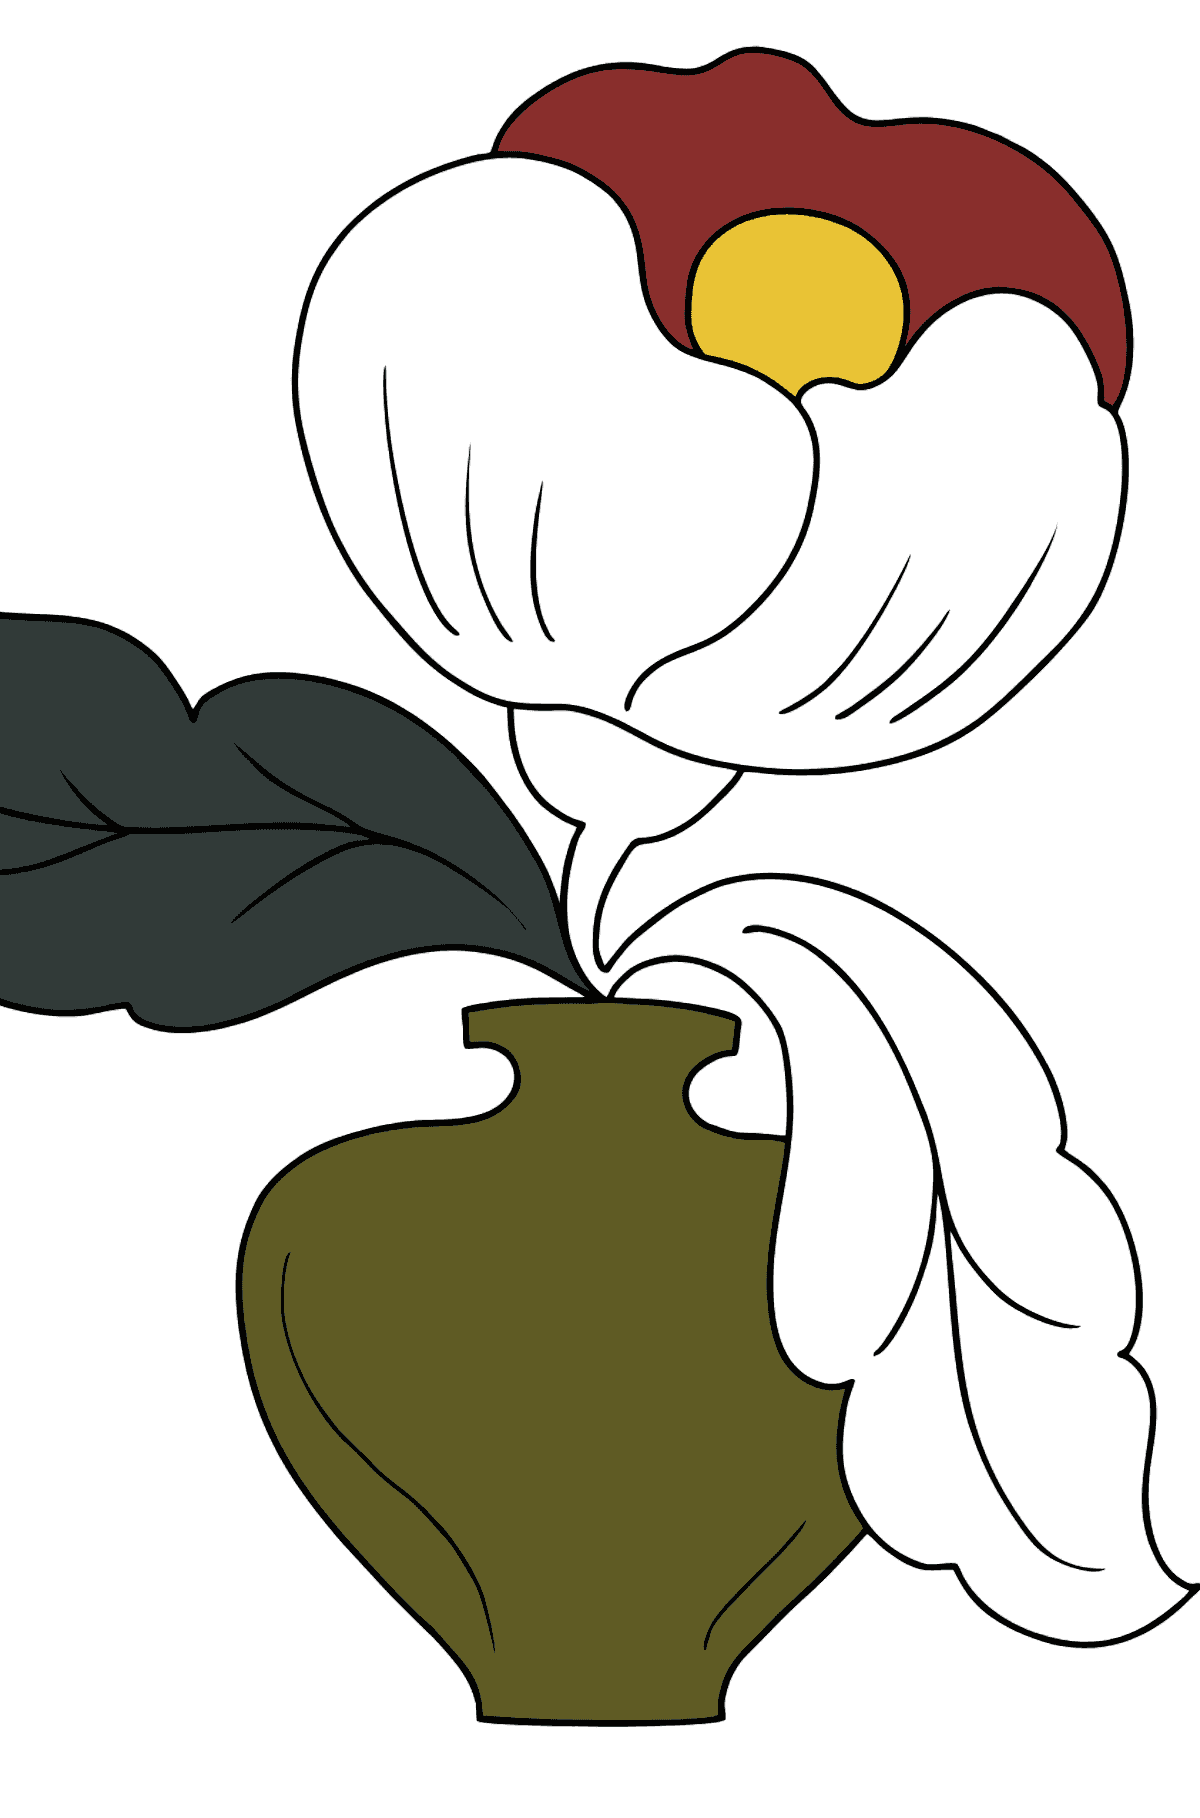 Coloring Page - flowers in a vase - Coloring Pages for Kids